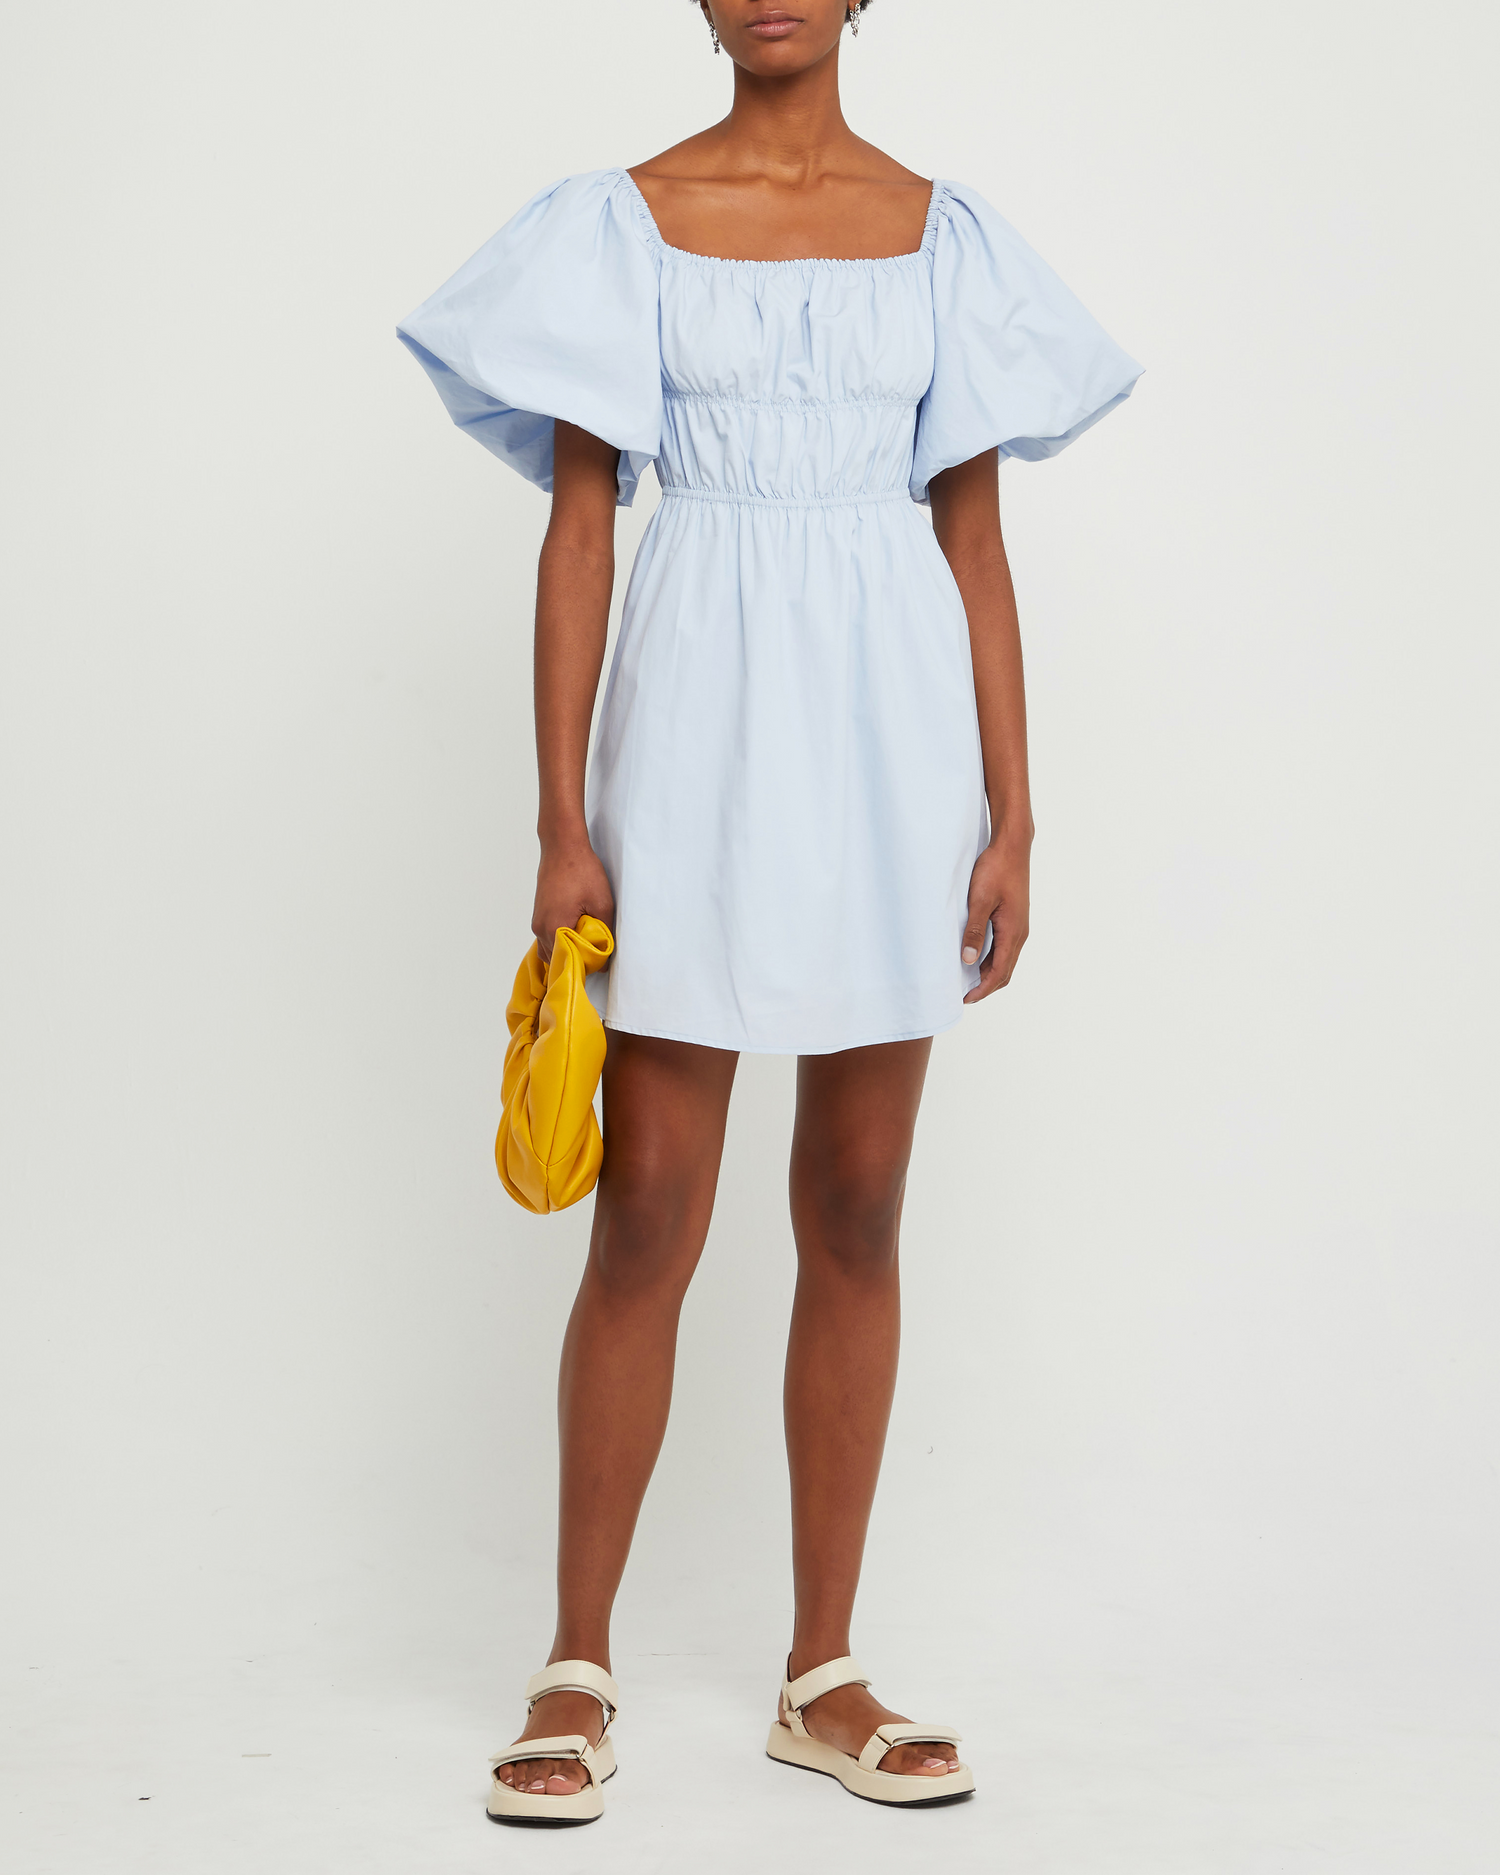 First image of Leanna Cotton Dress, a blue mini dress, puff sleeves, gathered bodice, short sleeve